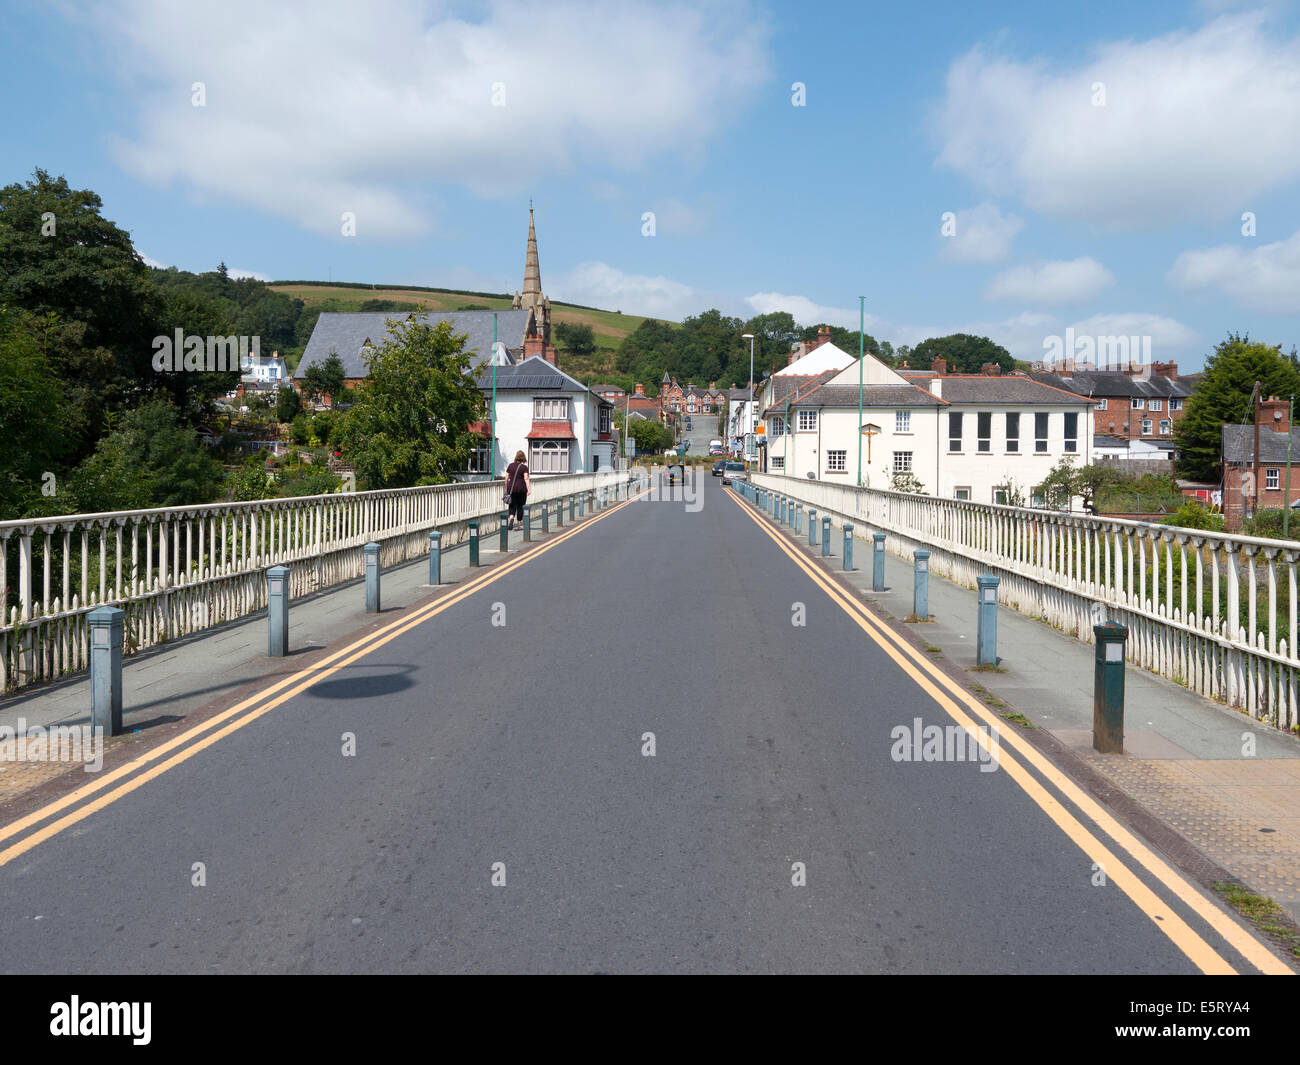 Long bridge street over the river Severn in Newtown, Powys Wales UK. Stock Photo